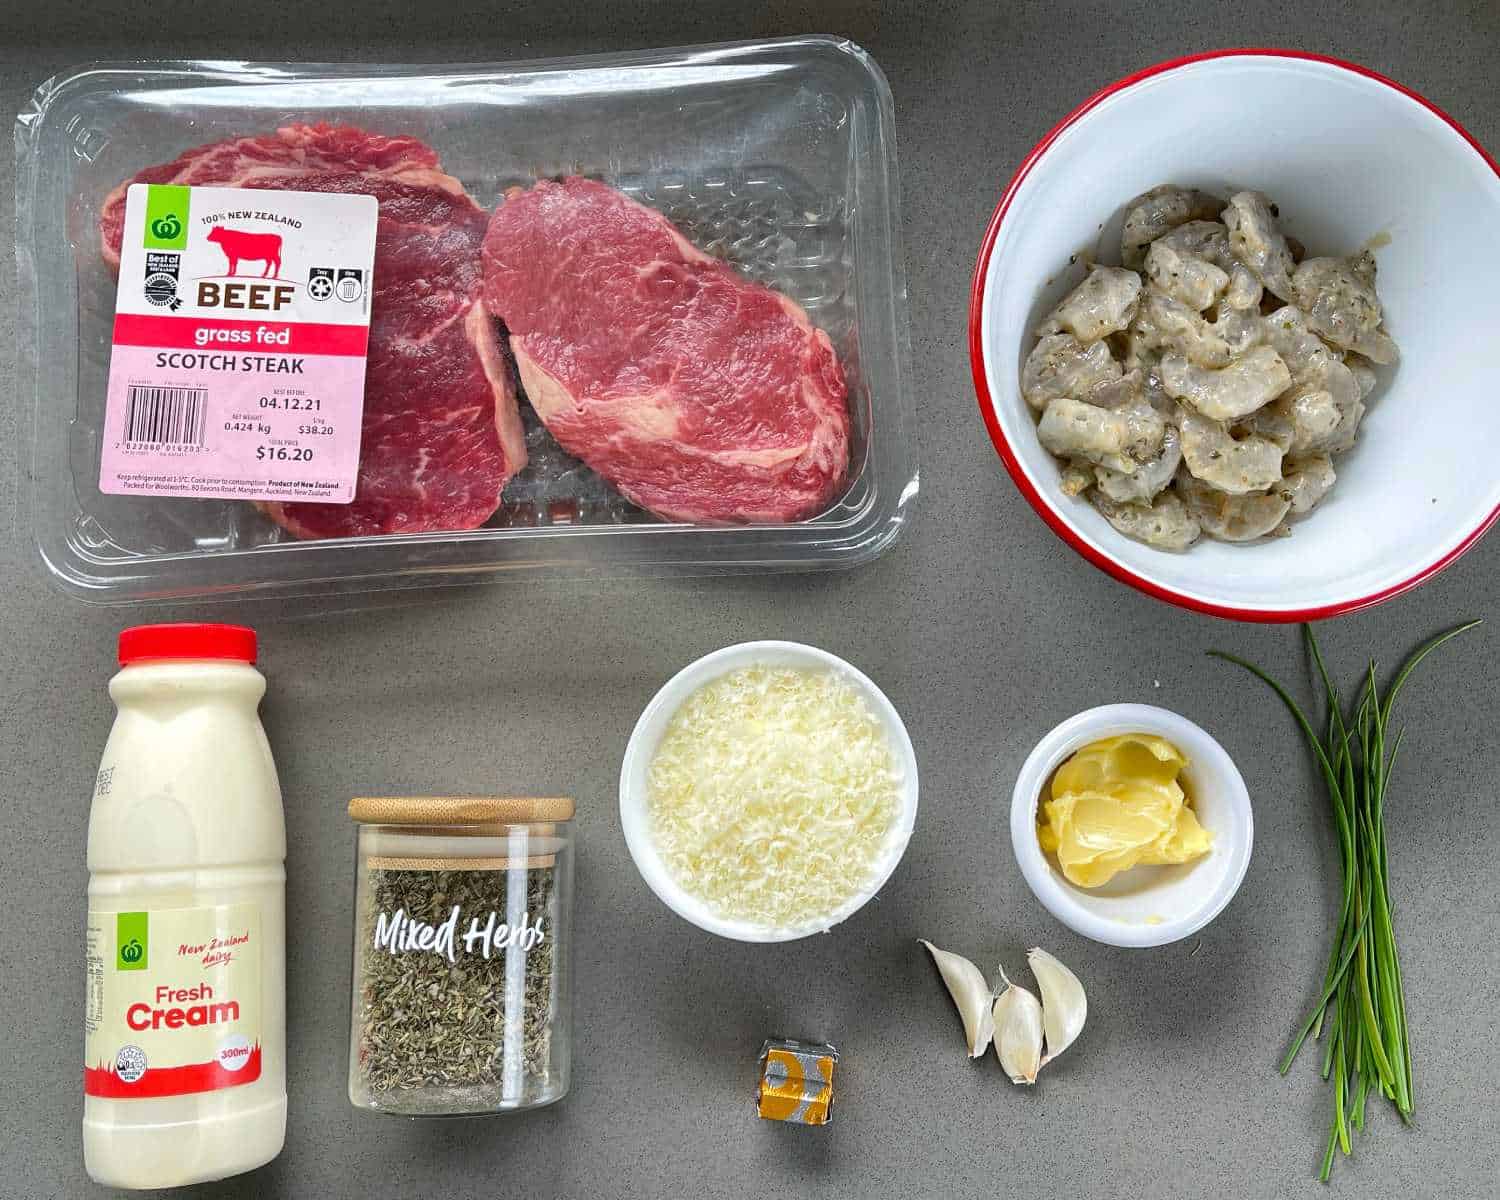 Ingredients for steak and creamy garlic pawns sitting on a grey bench